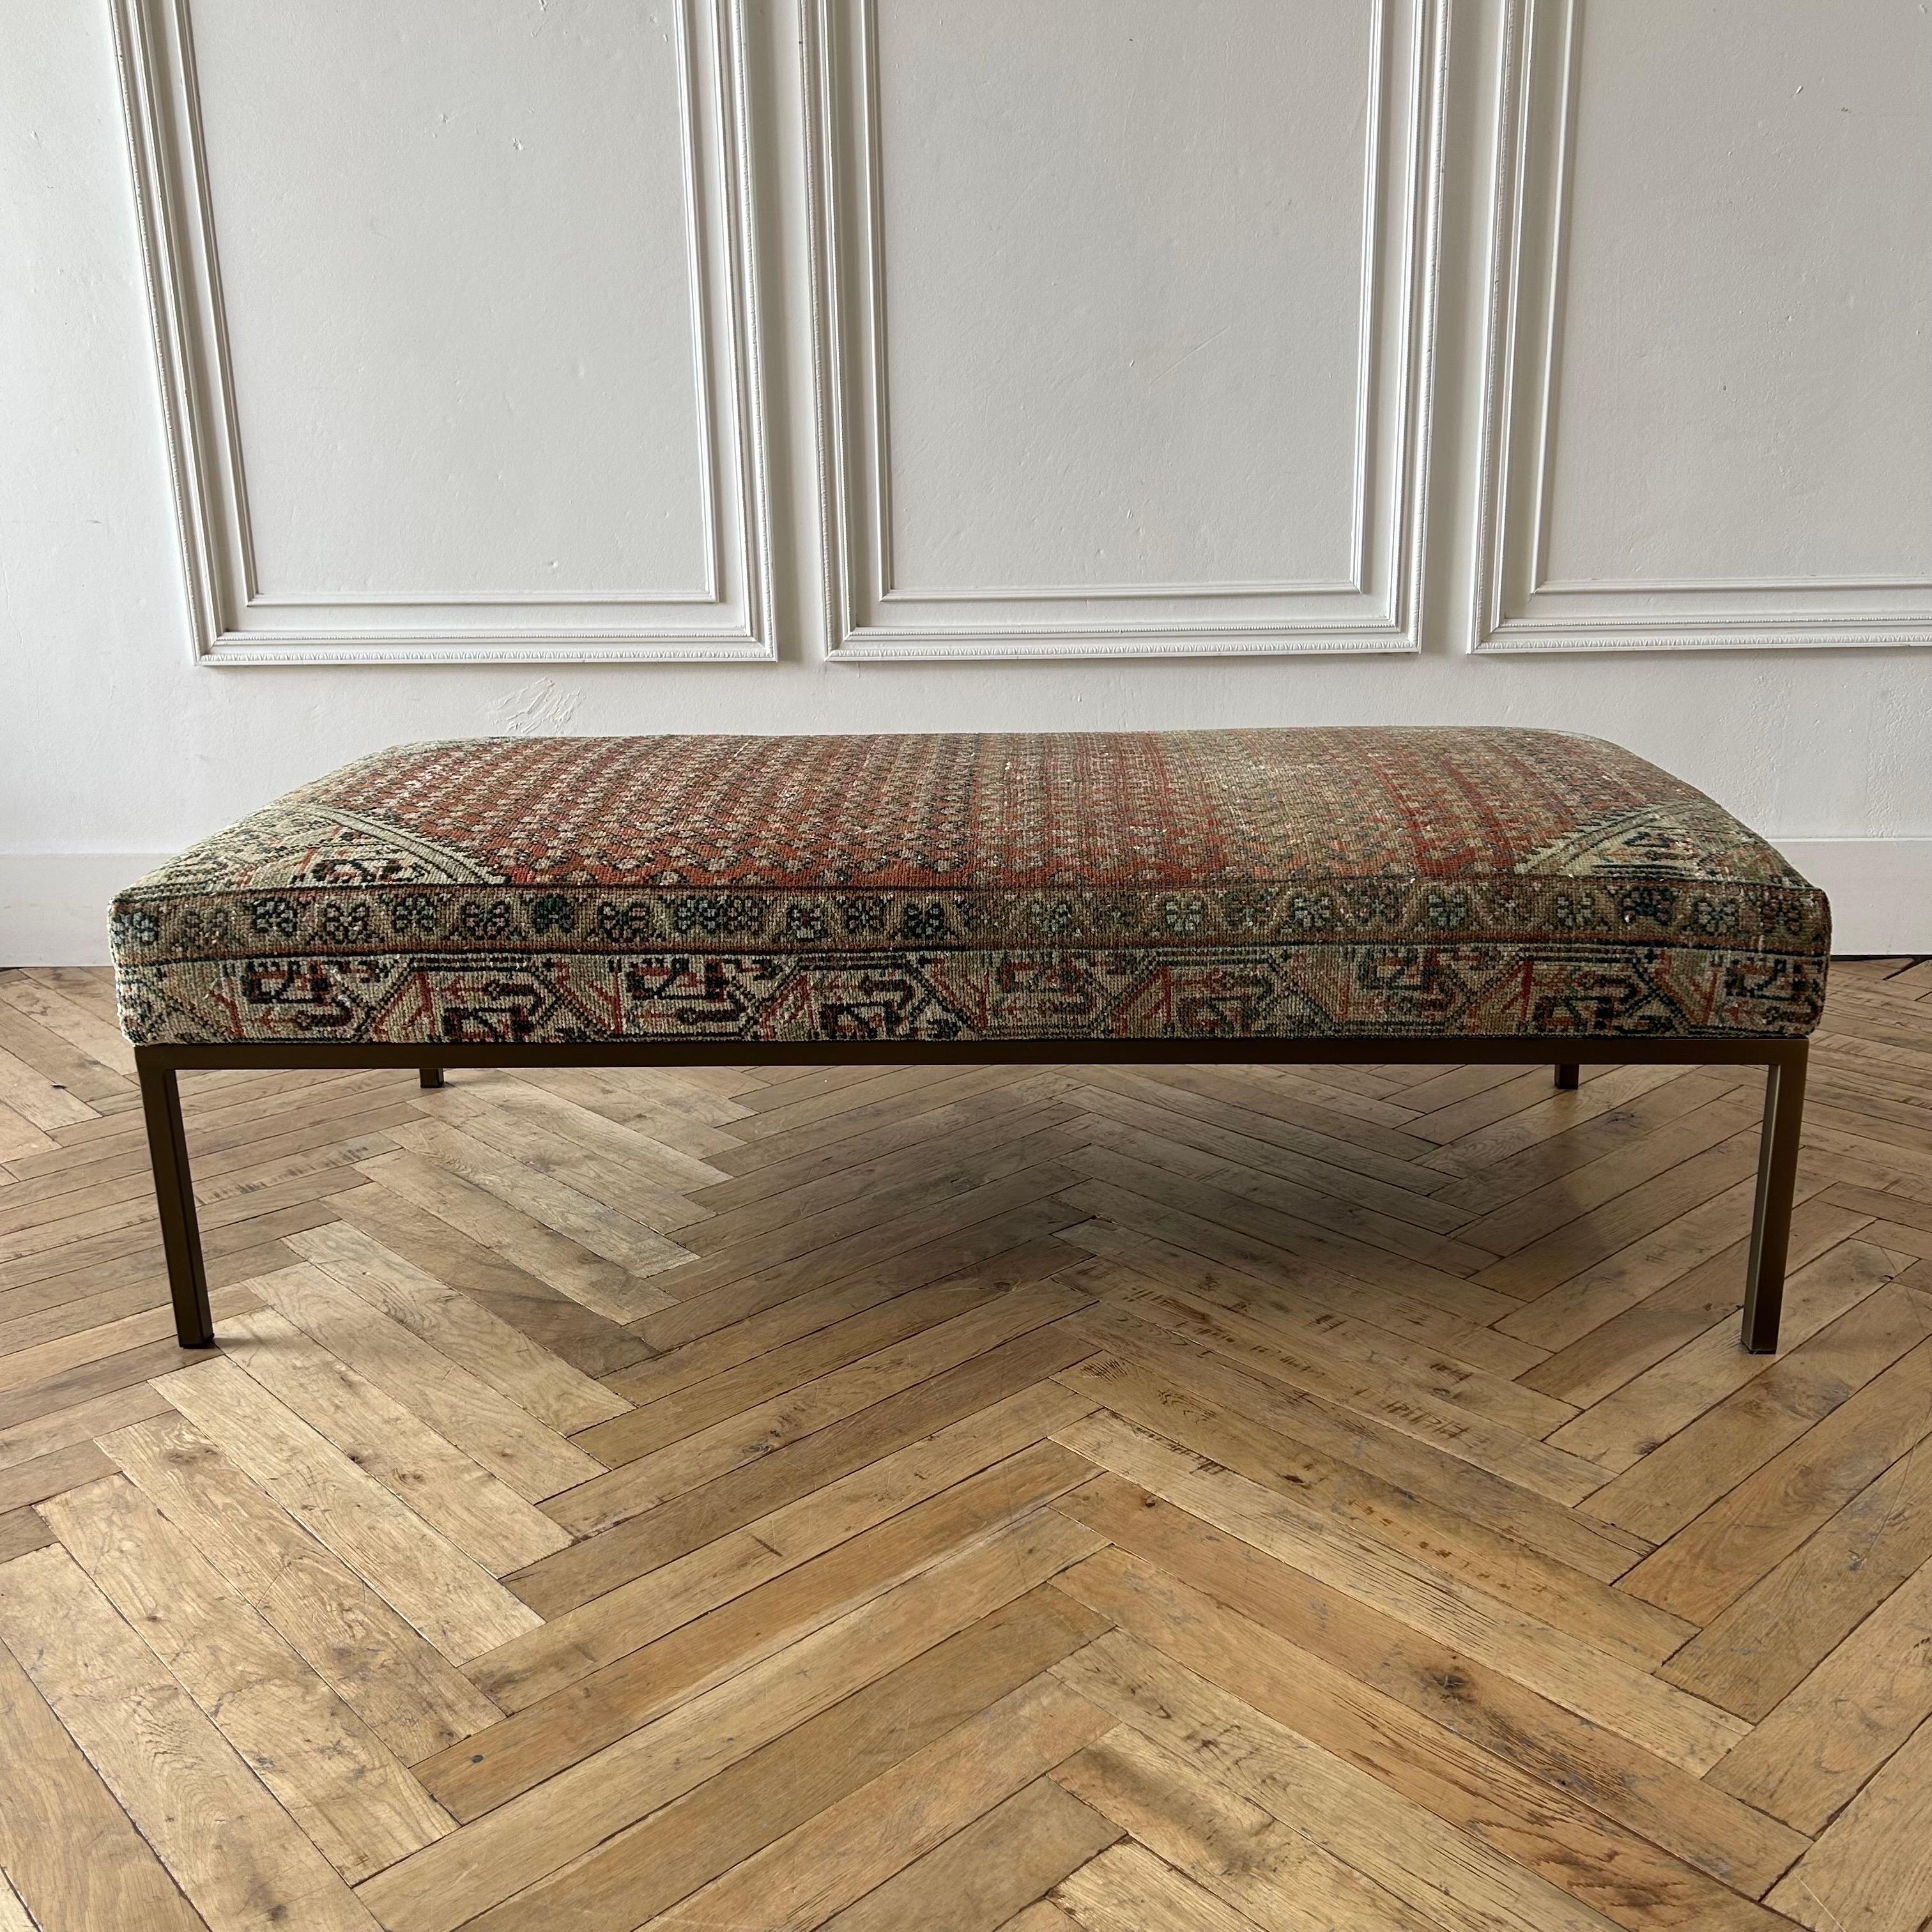 Custom Made bench ottoman by Bloom Home Inc.
Size: 60”w x 30”d x 18”h
Custom made metal base, and powder coated in a dark iron bronze finish.
The upholstered top is from an antique or vintage turkish rug.
Color: faded brick / gray / off white /